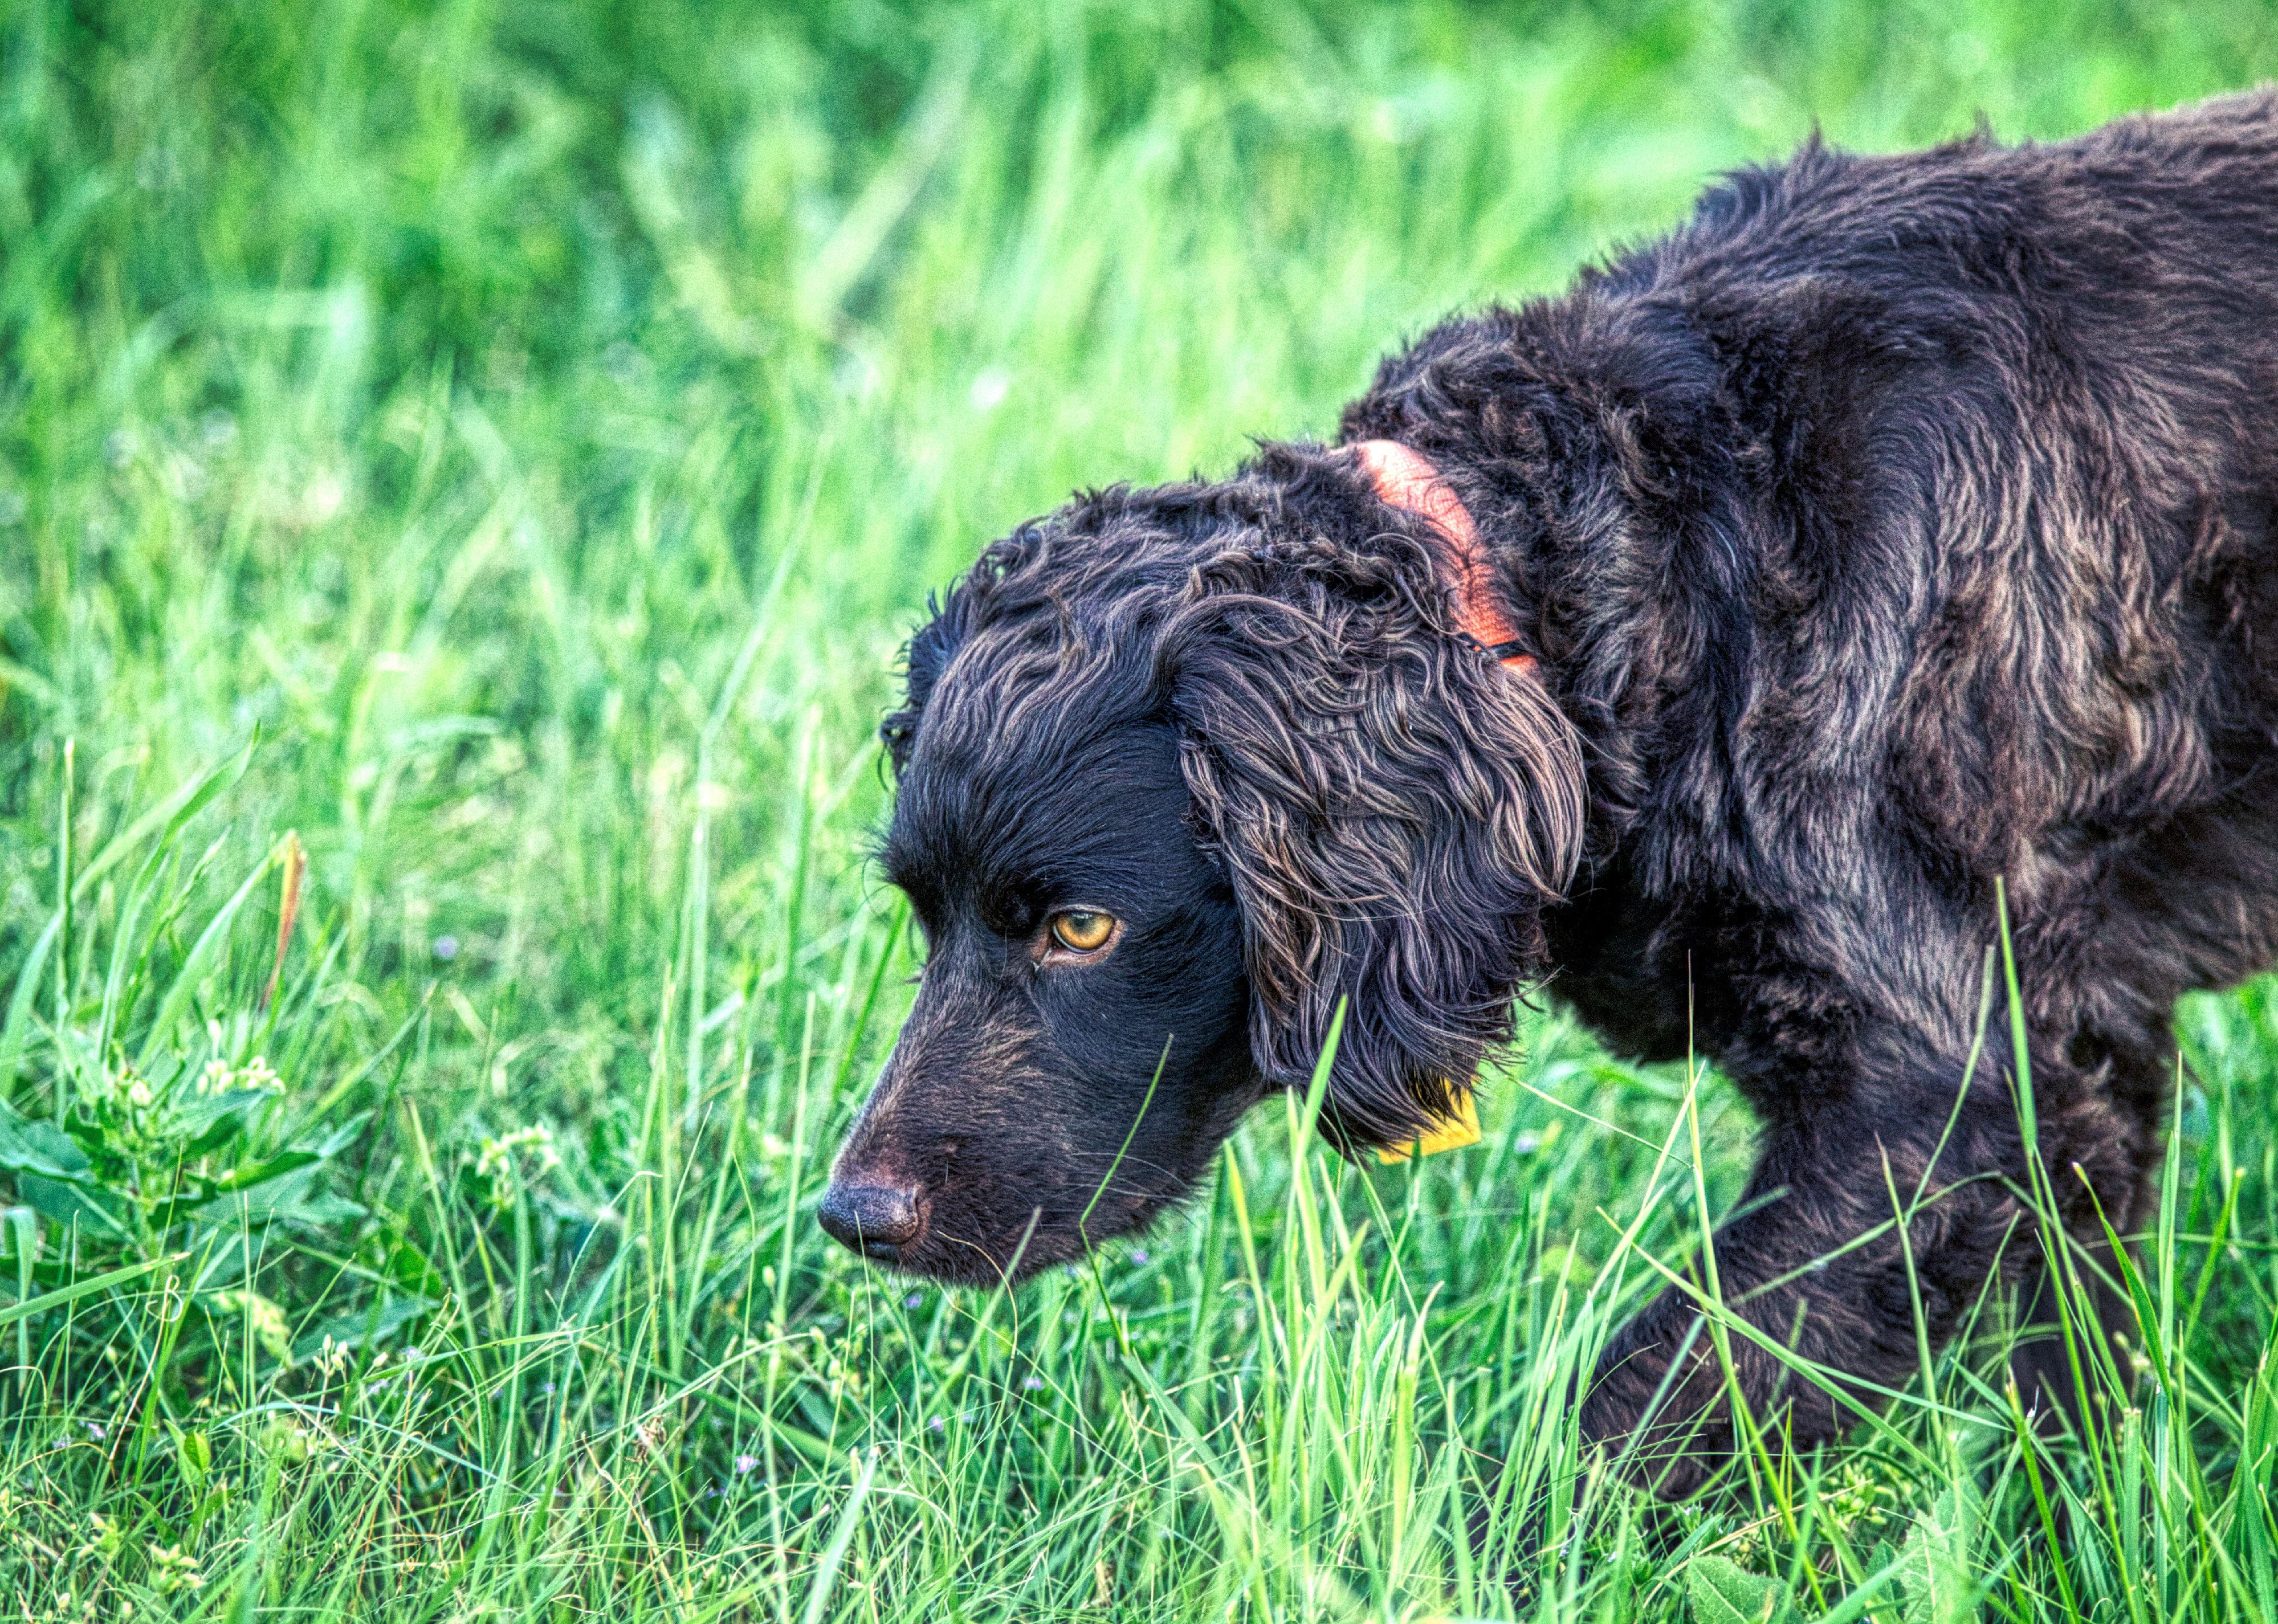 Boykin Spaniel sniffing and looking in grass.